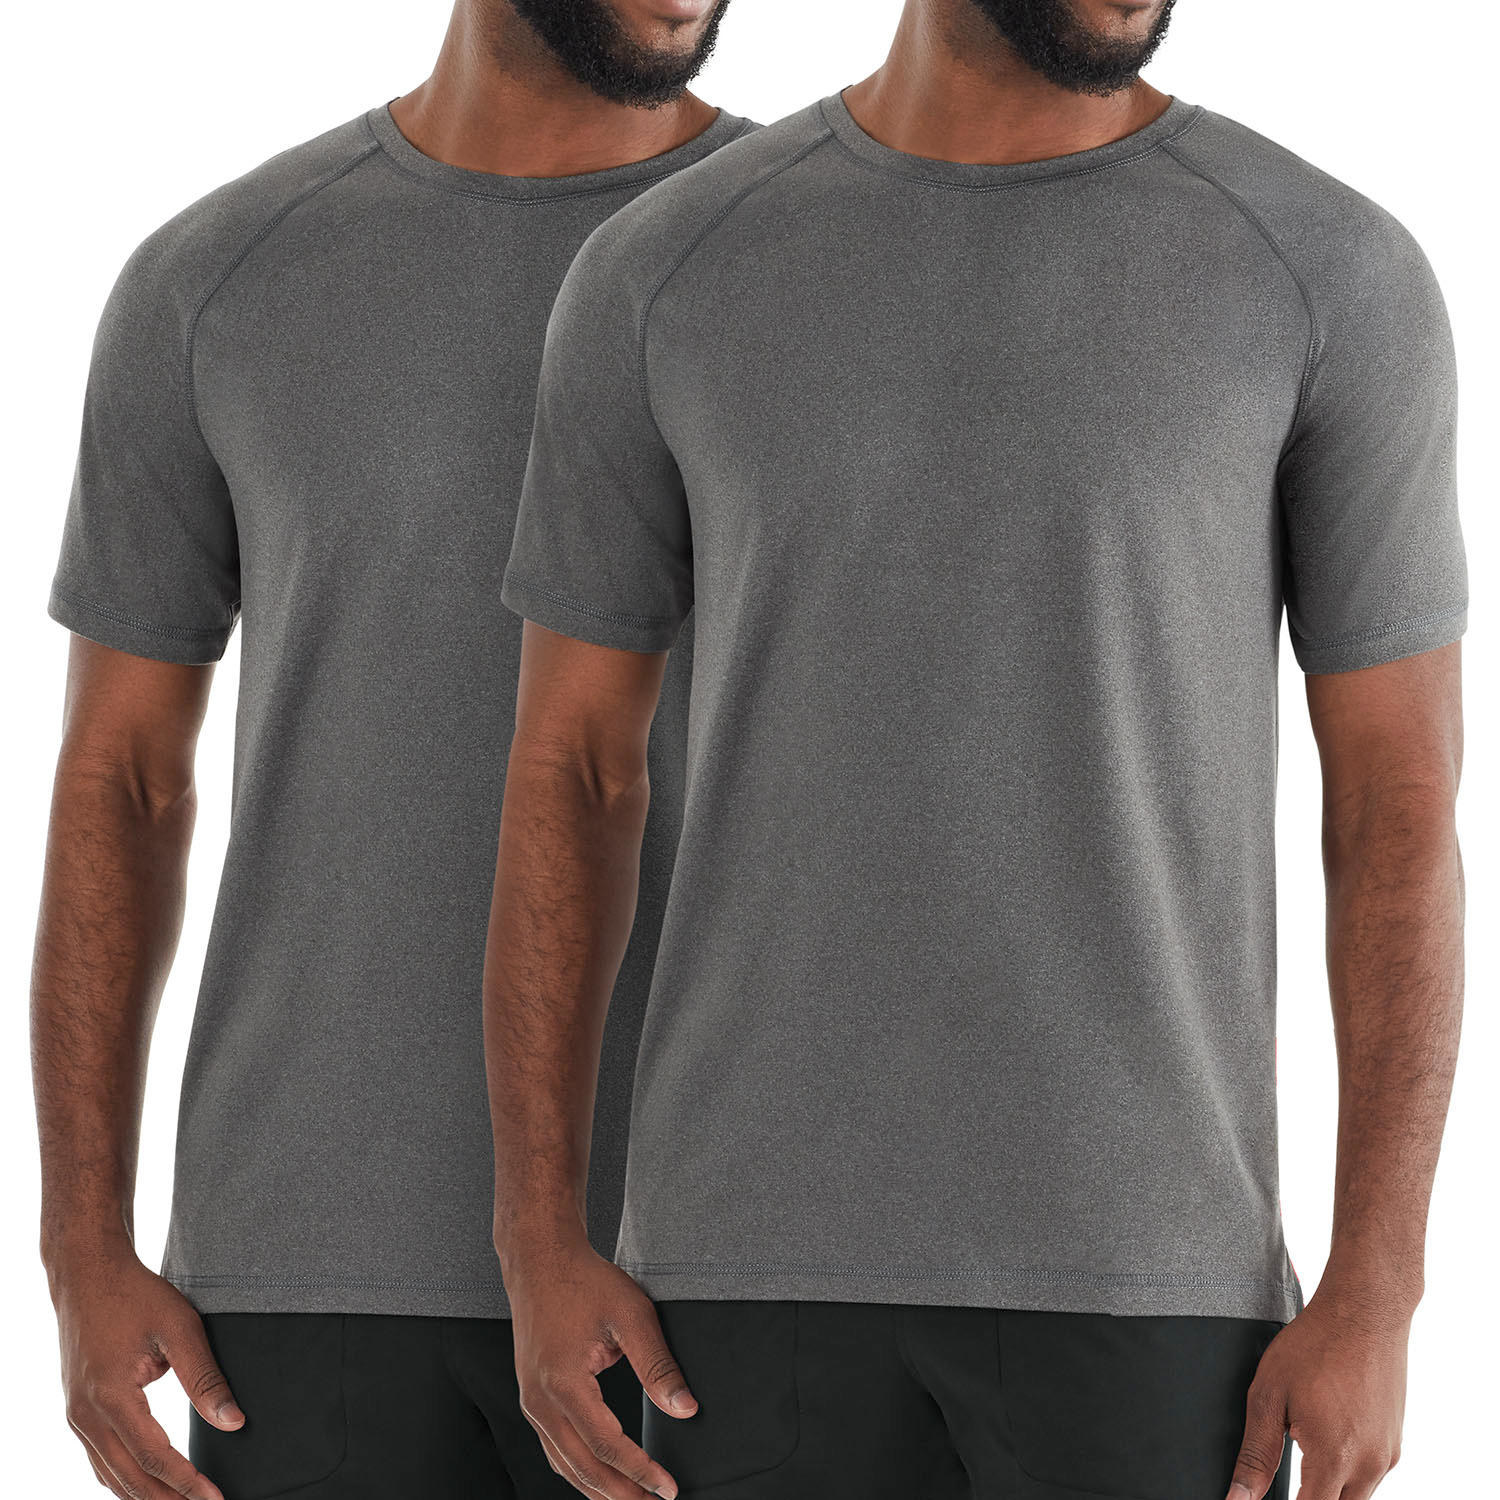 A pack of two t-shirts that provide UPF30+ protection and are made with a moisture-wicking material